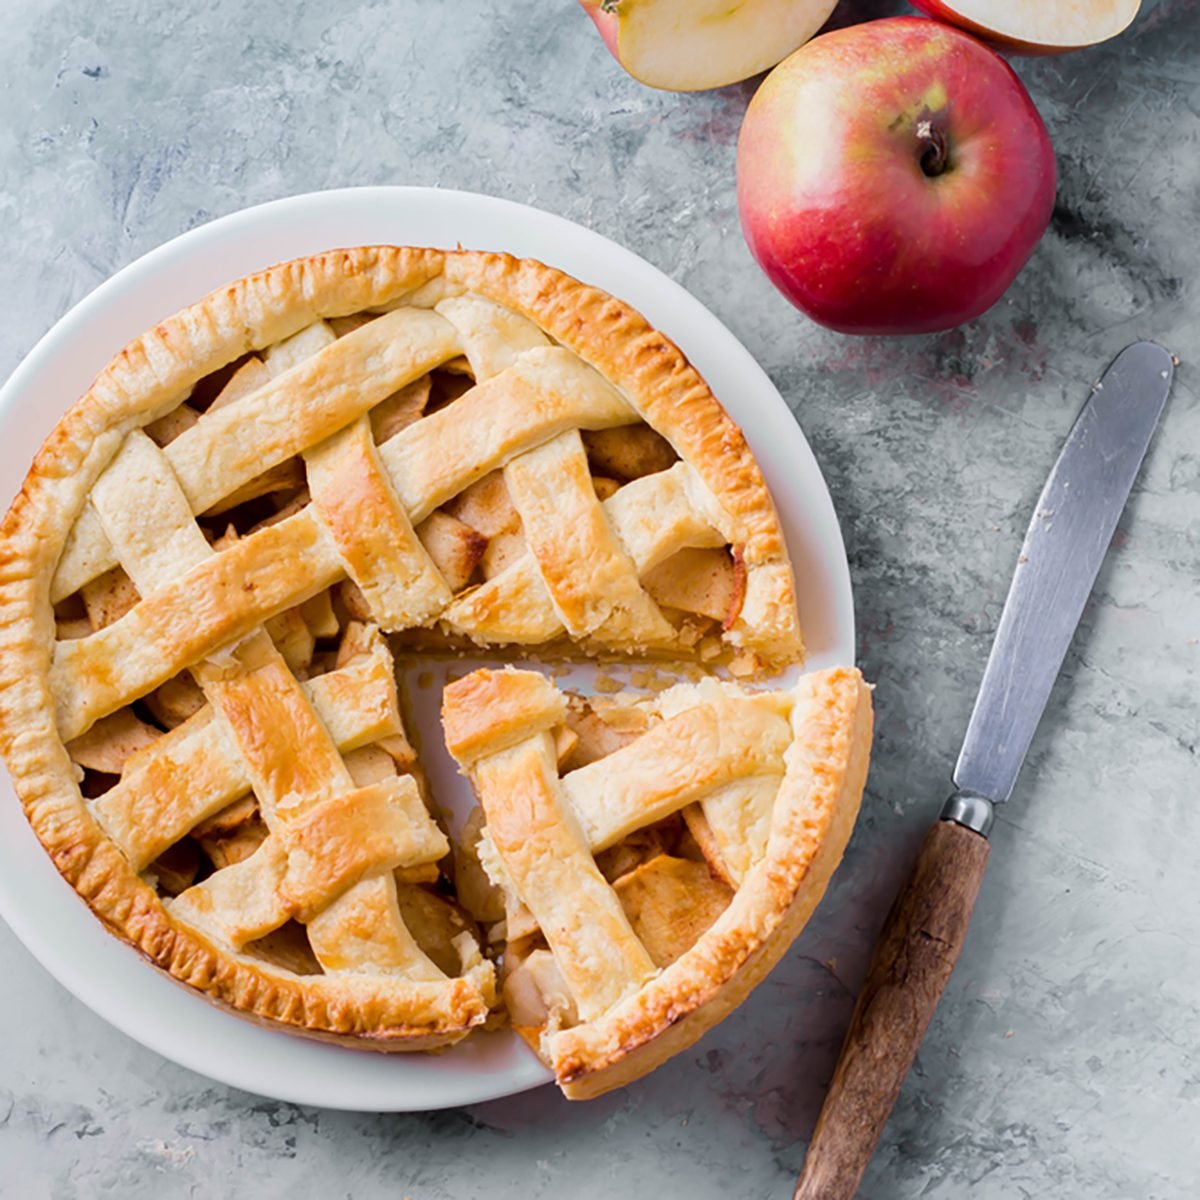 Popular American apple pie piece and cup of tea on gray table background. 